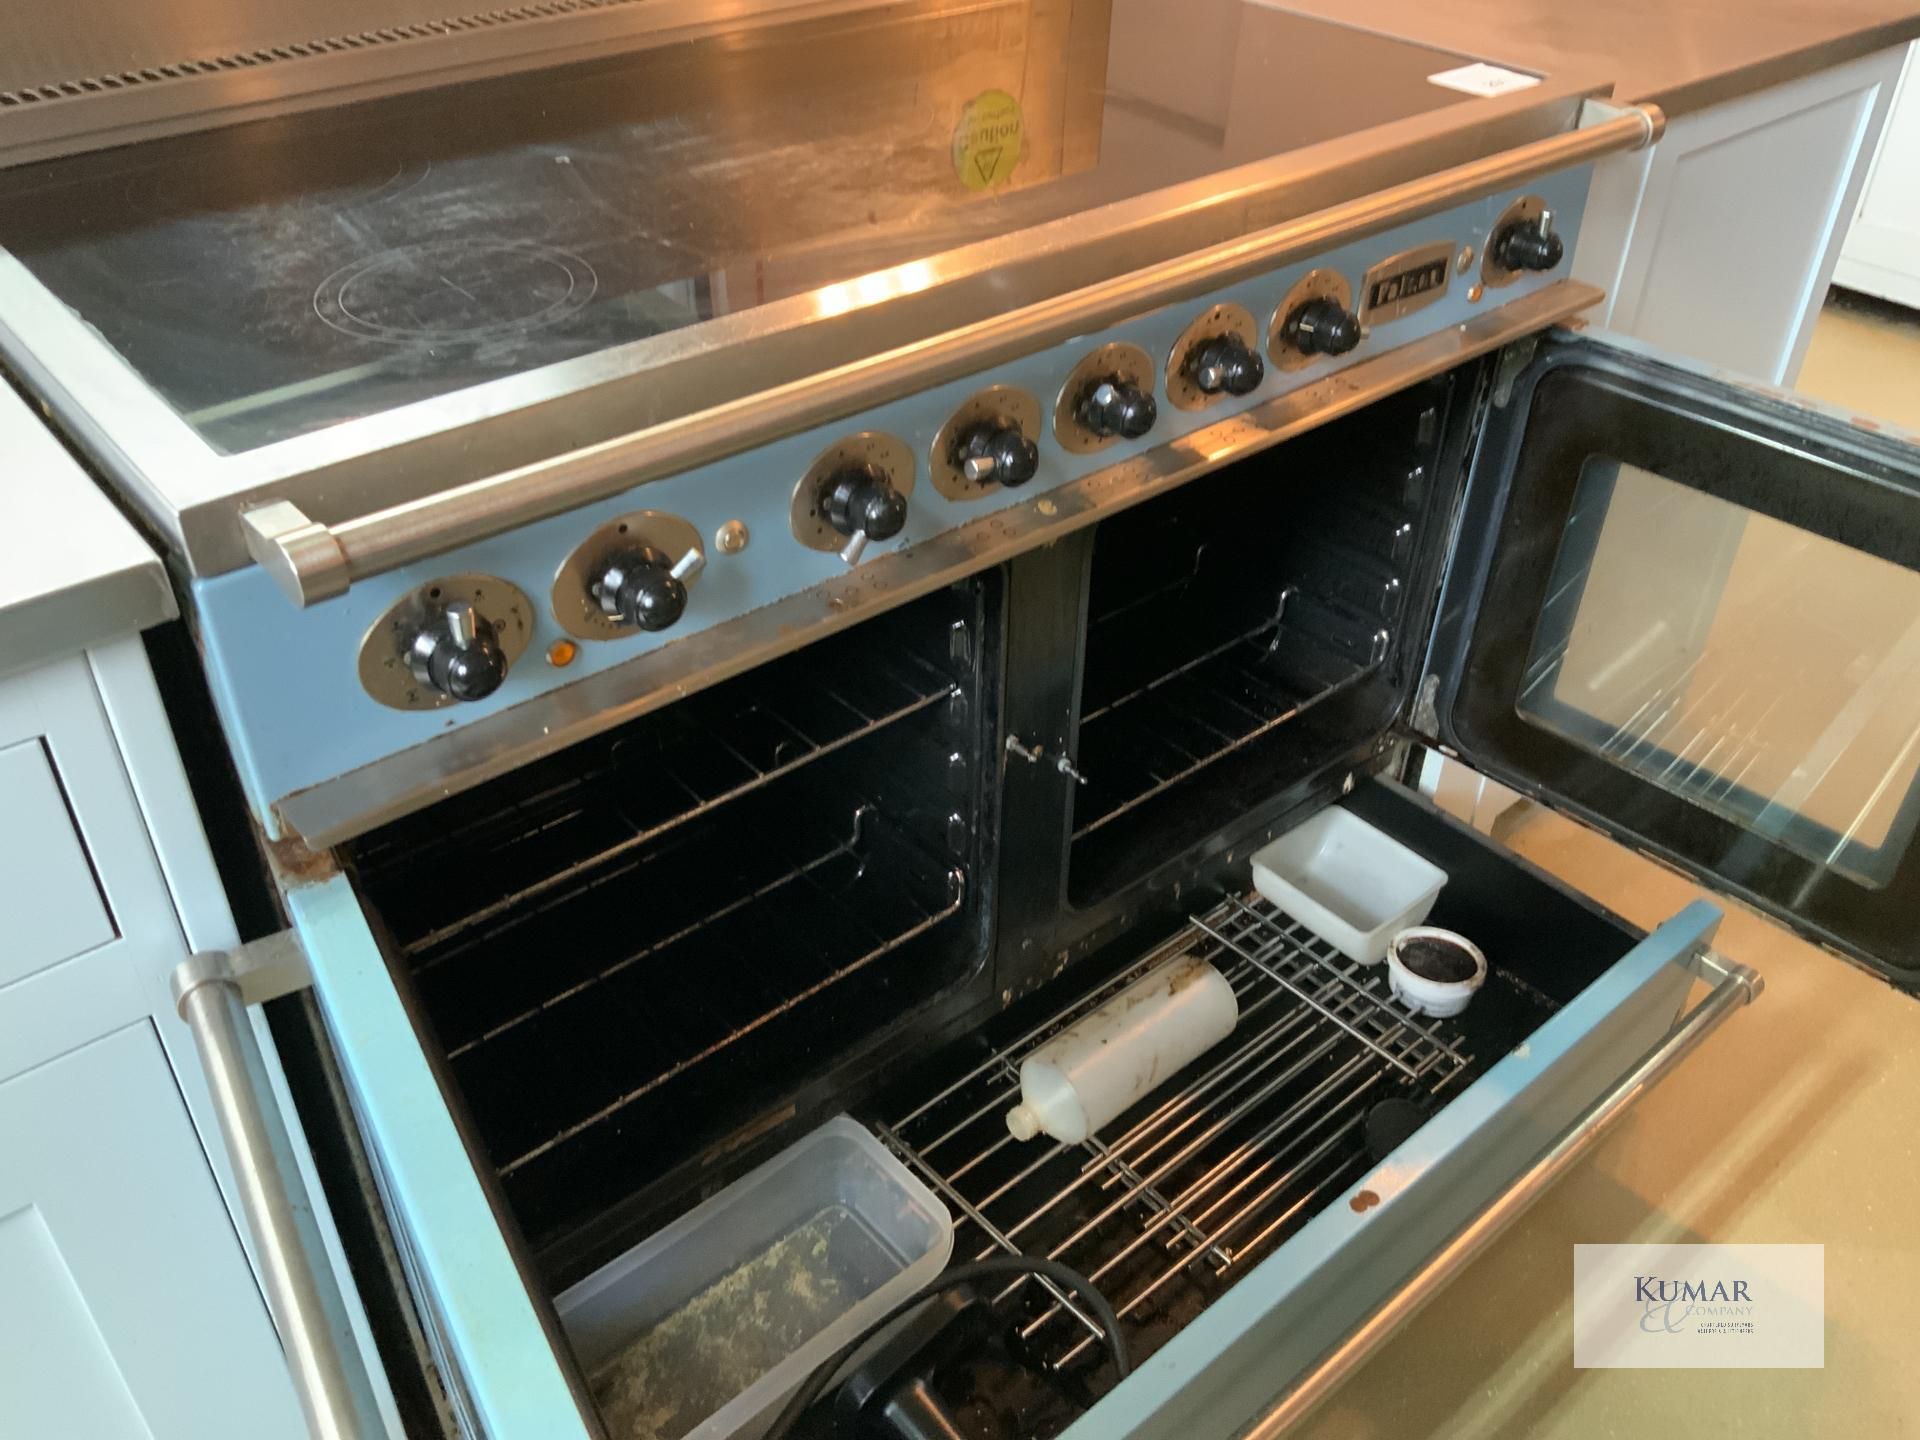 China Blue Aga Rangemaster Falcon Continental 1092 Range Cookers with Twin Ovens & 5 Position - Image 6 of 10